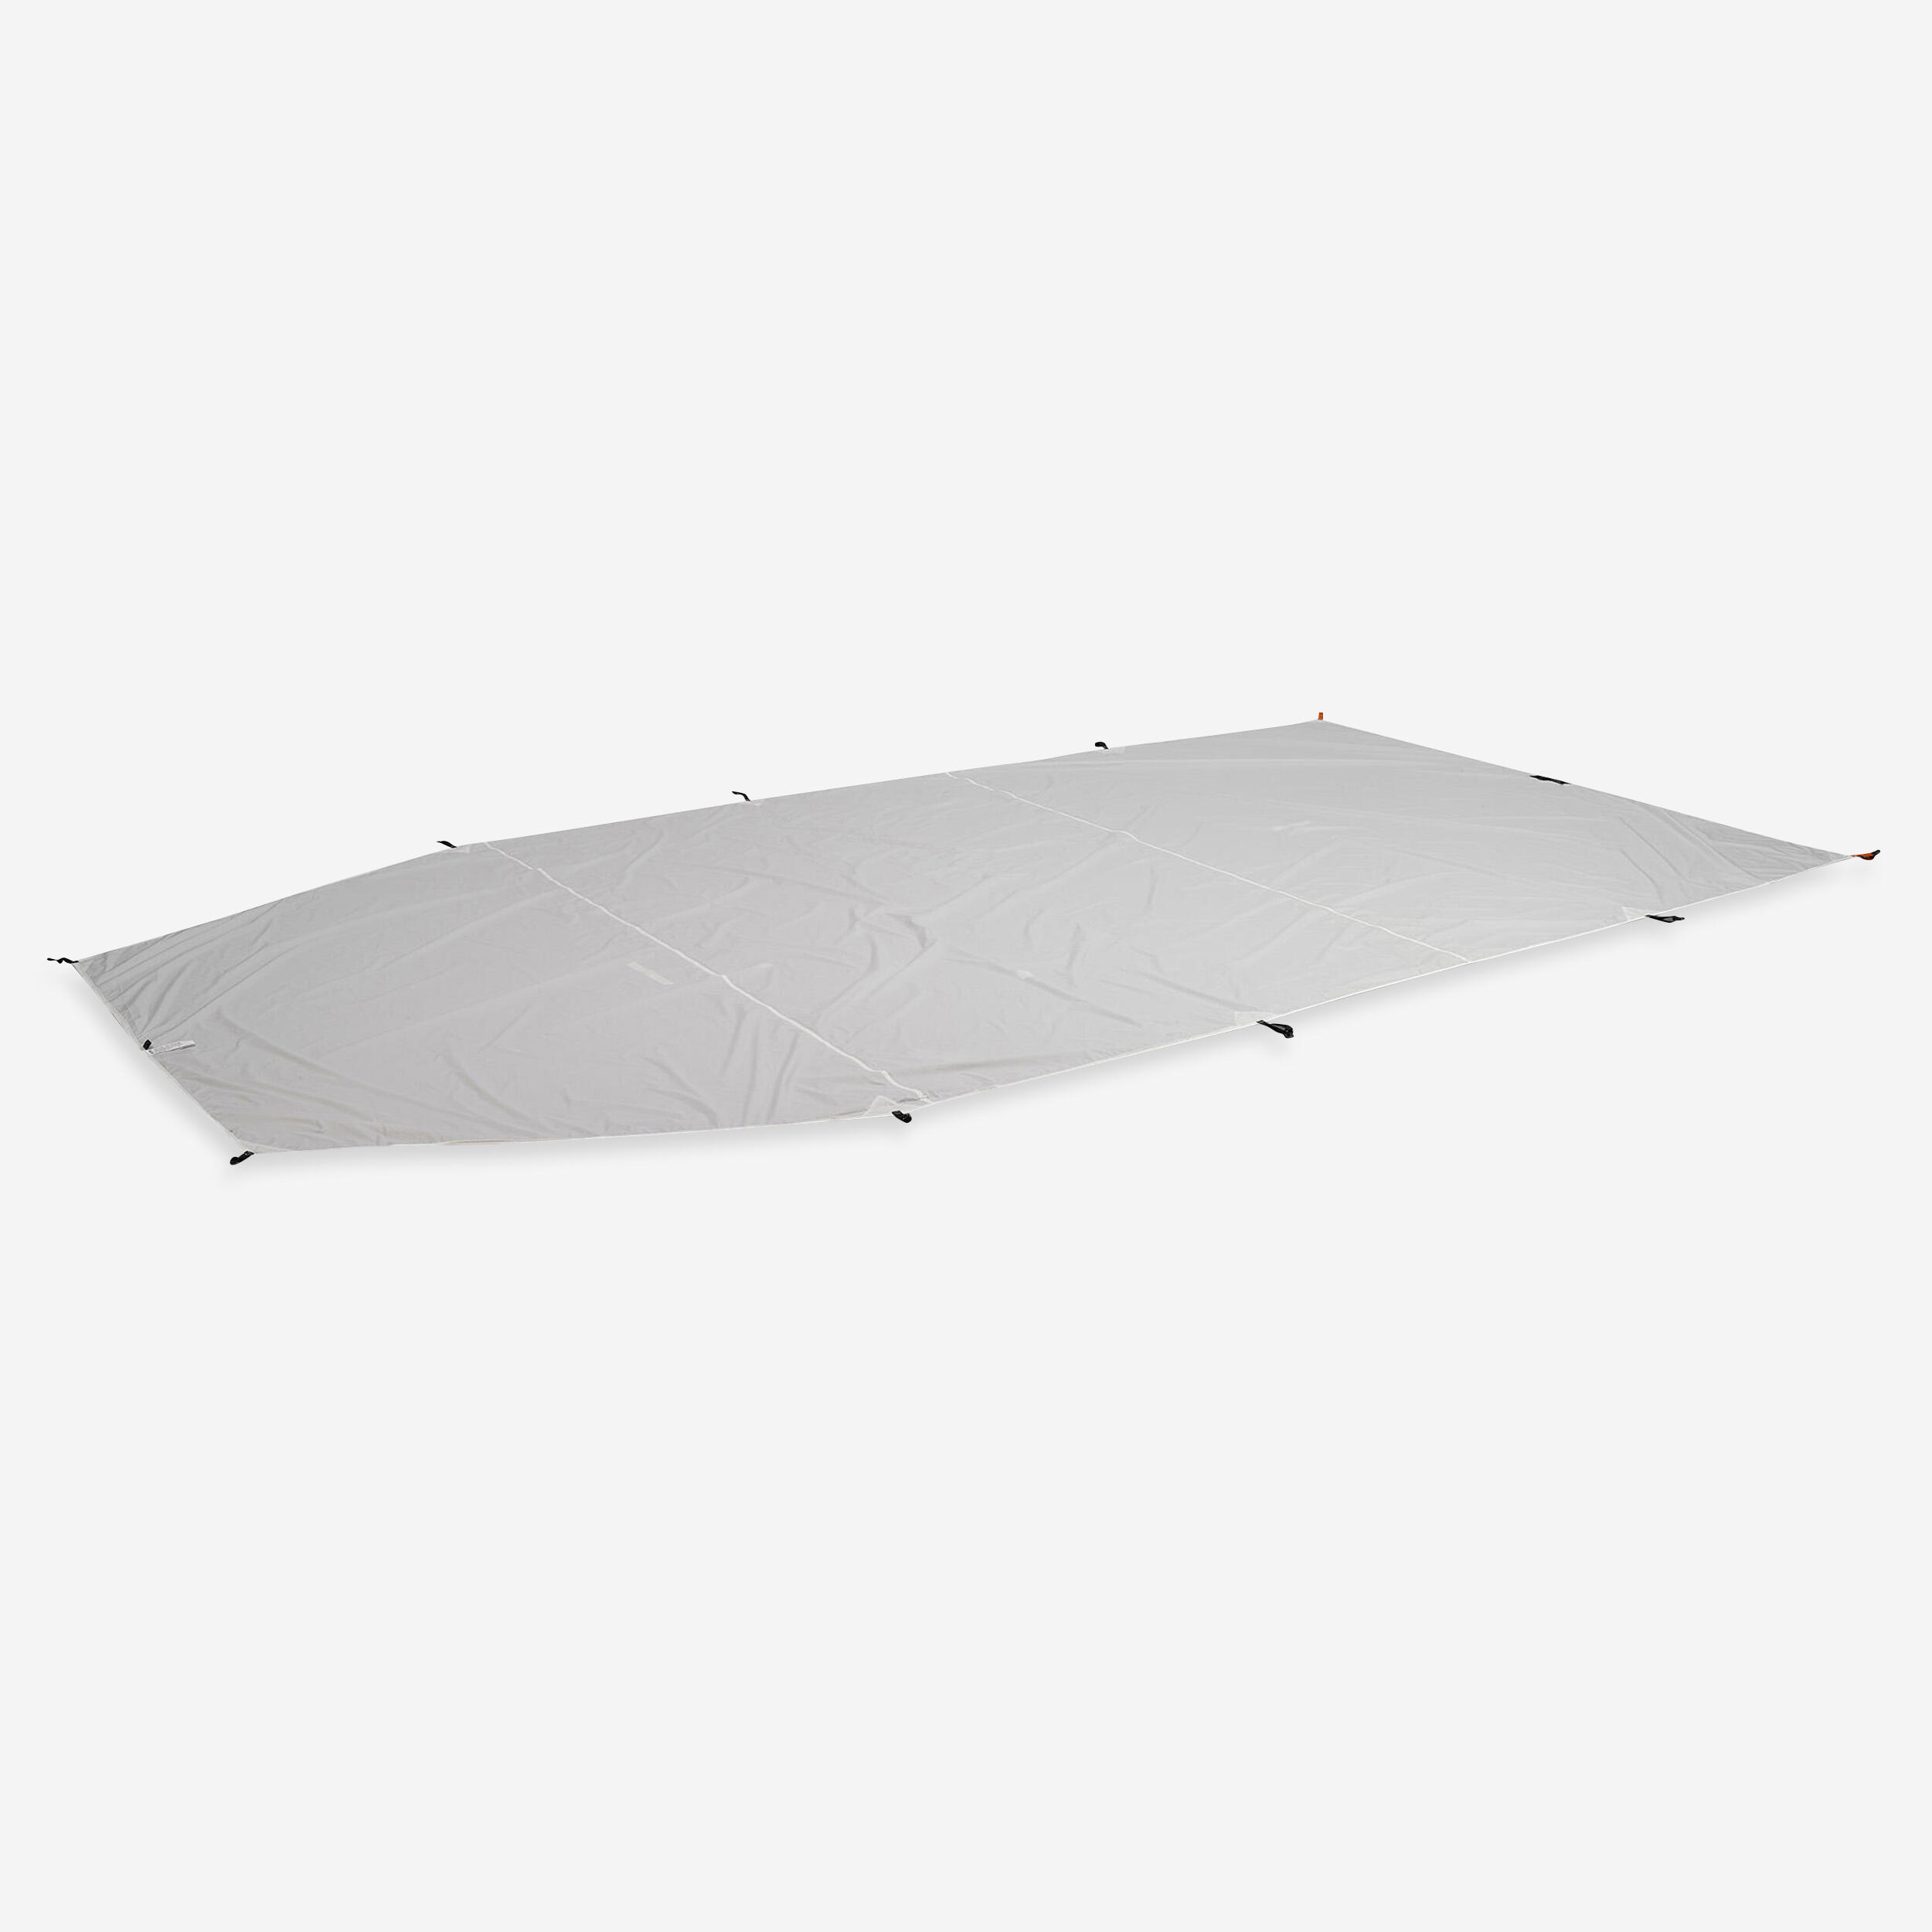 Groundsheet MT900 for 4 person tent - Undyed 1/3